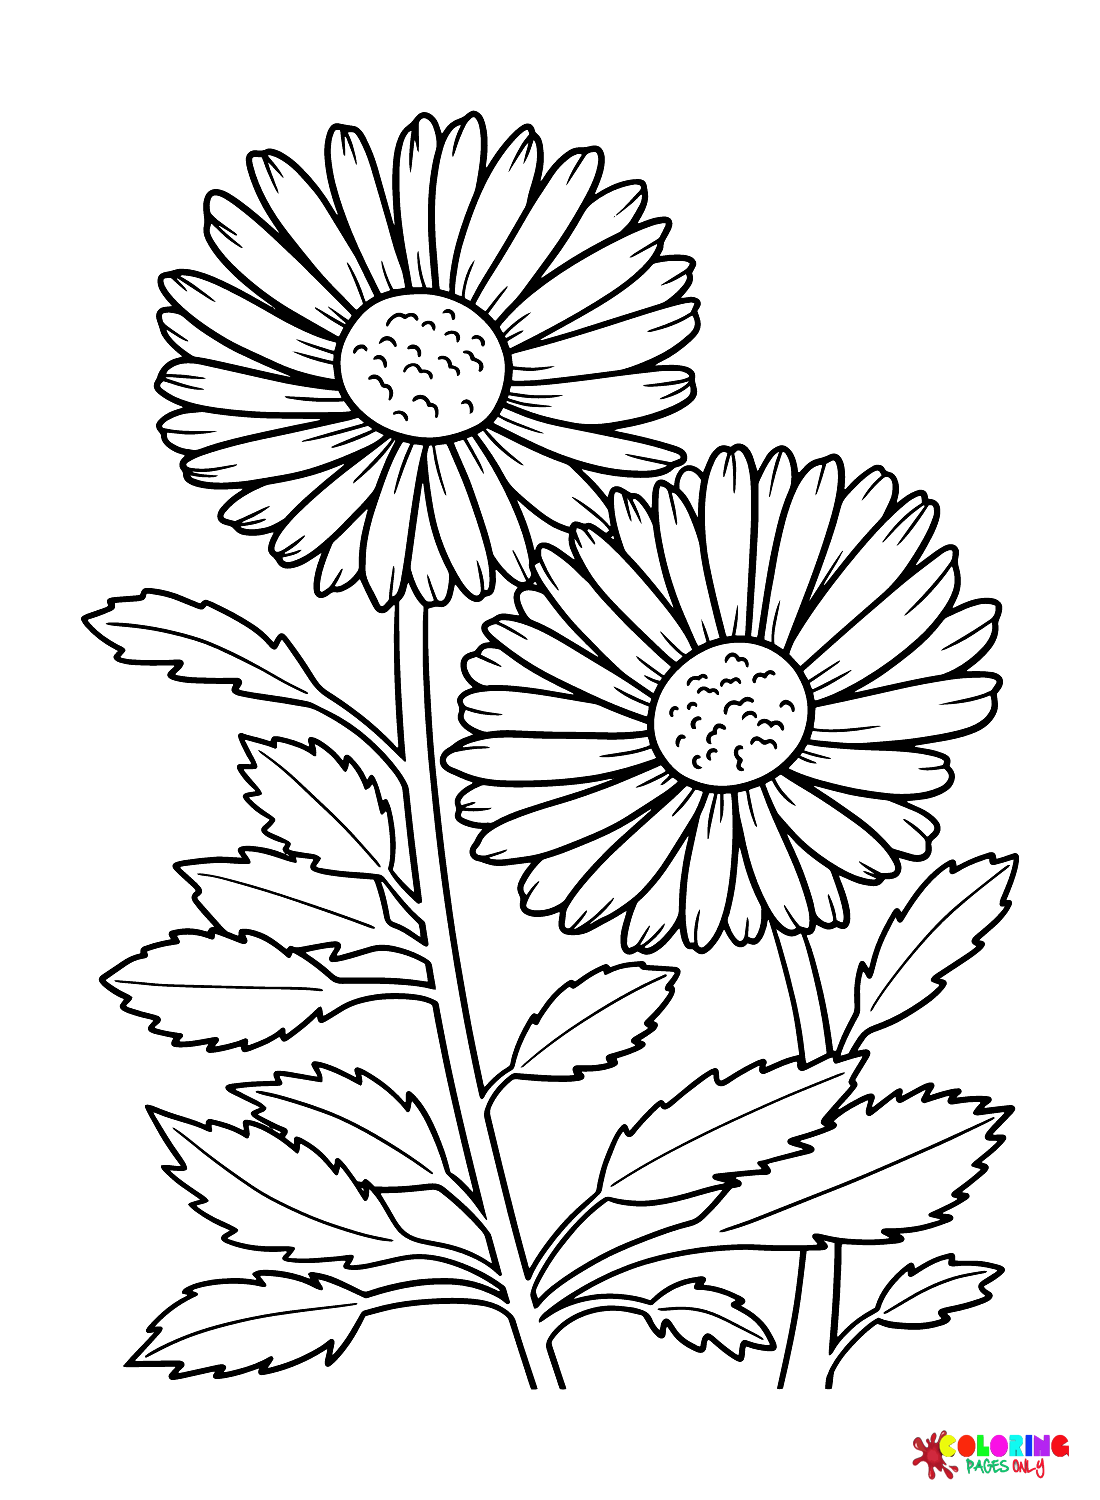 Daisy Coloring Pages Printable for Free Download